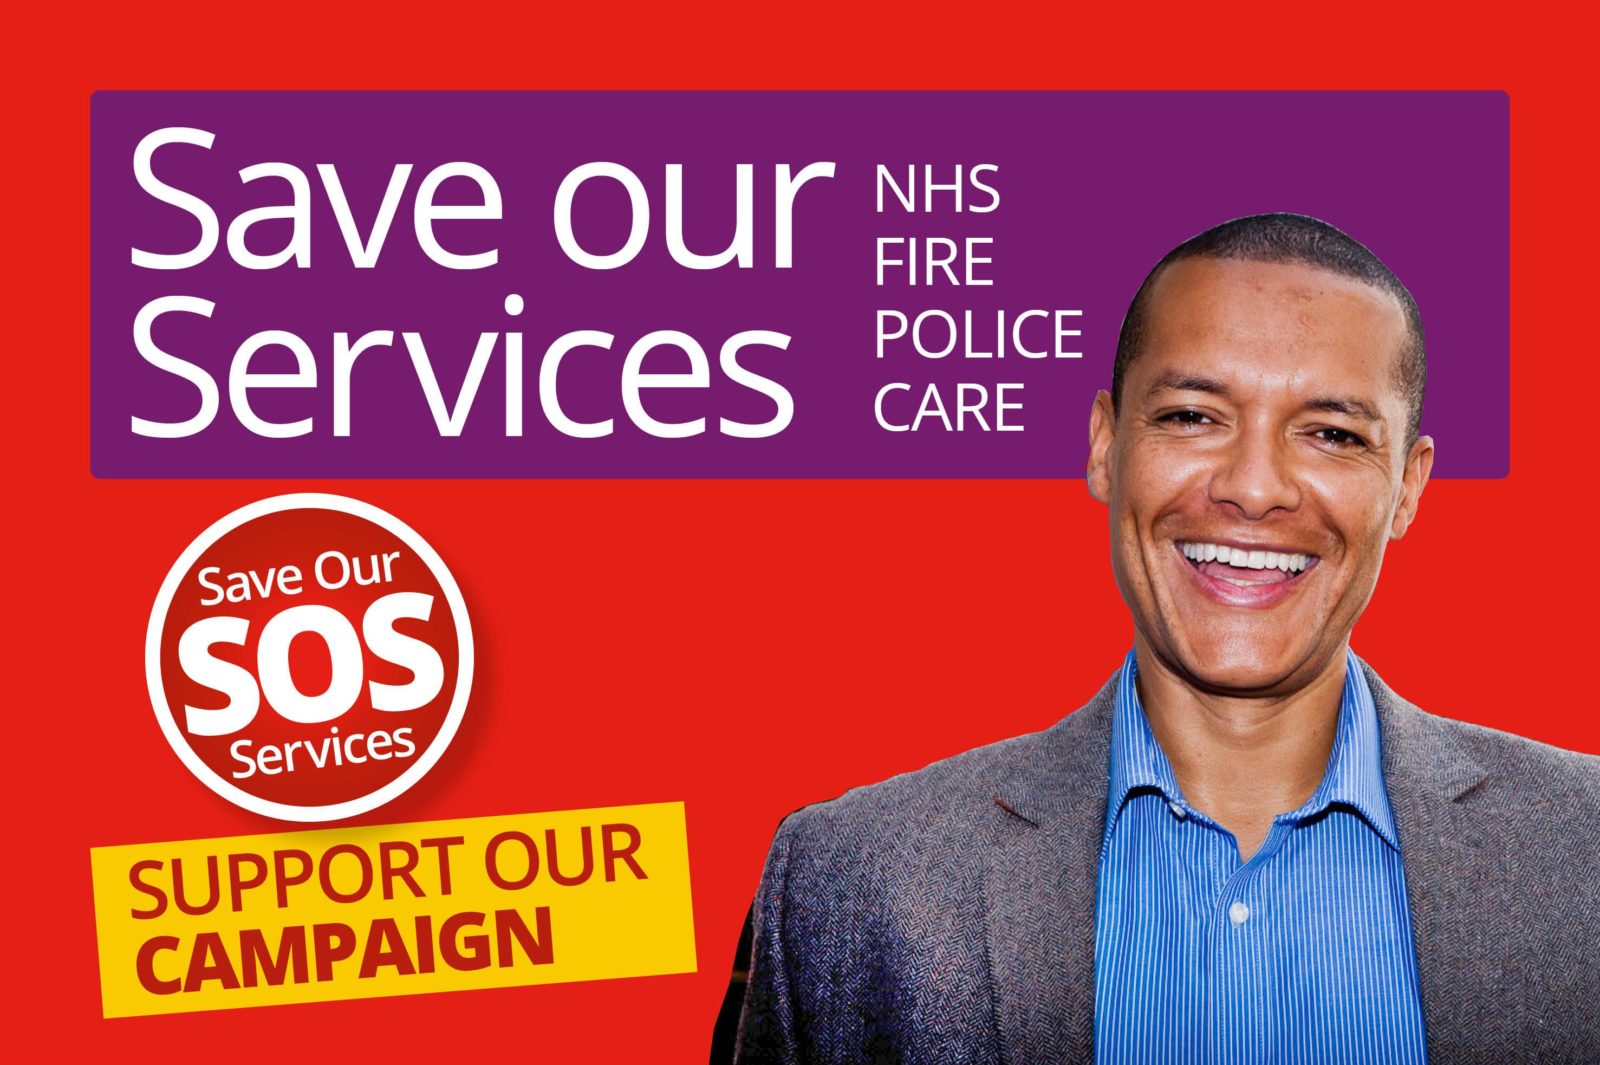 Save our Services: NHS, fire, police, care